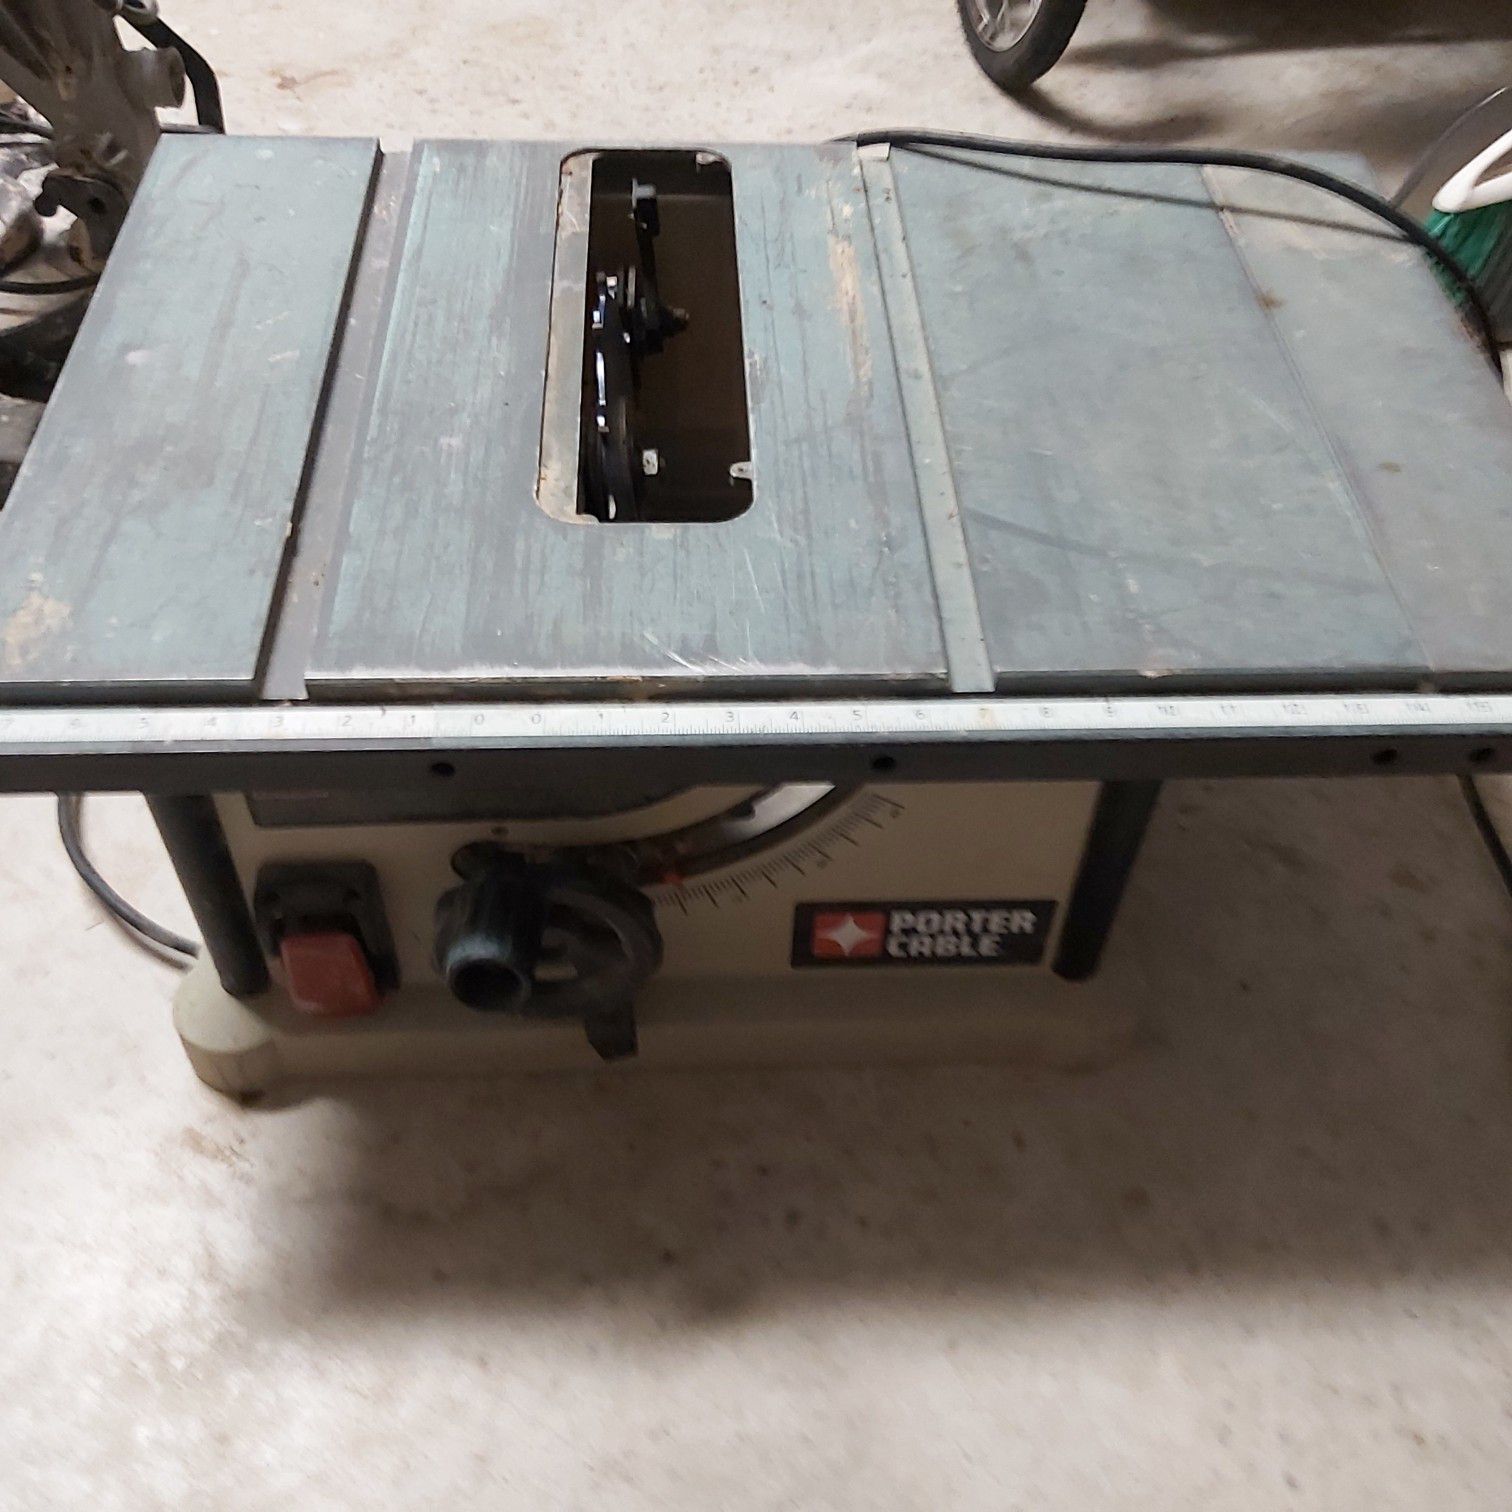 Porter cable table saw